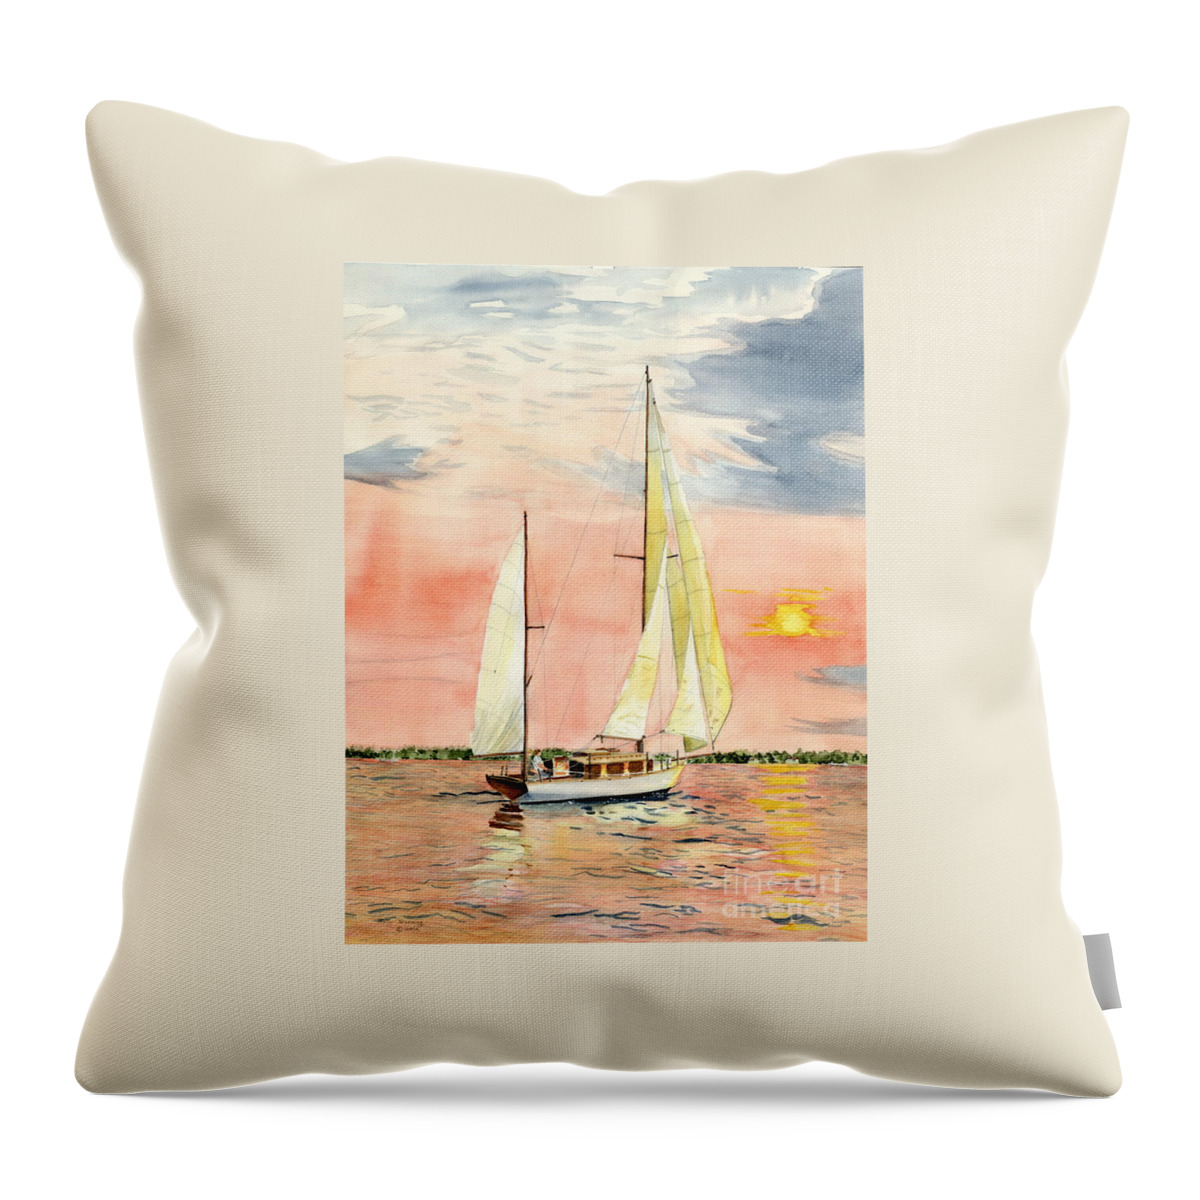 Sailing Boat Throw Pillow featuring the painting Sea Star by Melly Terpening